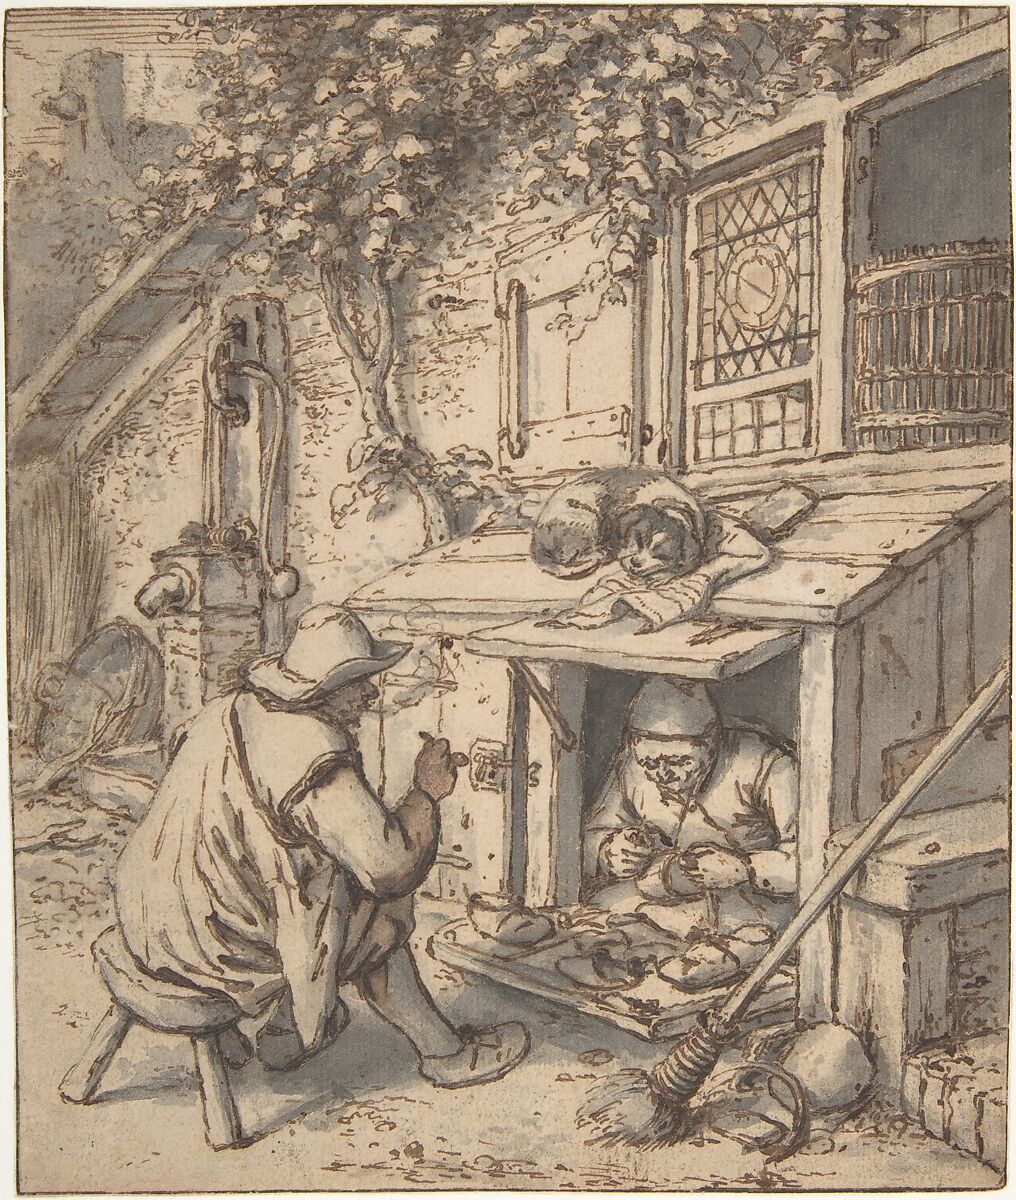 The Cobbler, Adriaen van Ostade  Dutch, Pen and brown ink, brush and gray wash, over graphite underdrawing. Incised for transfer.